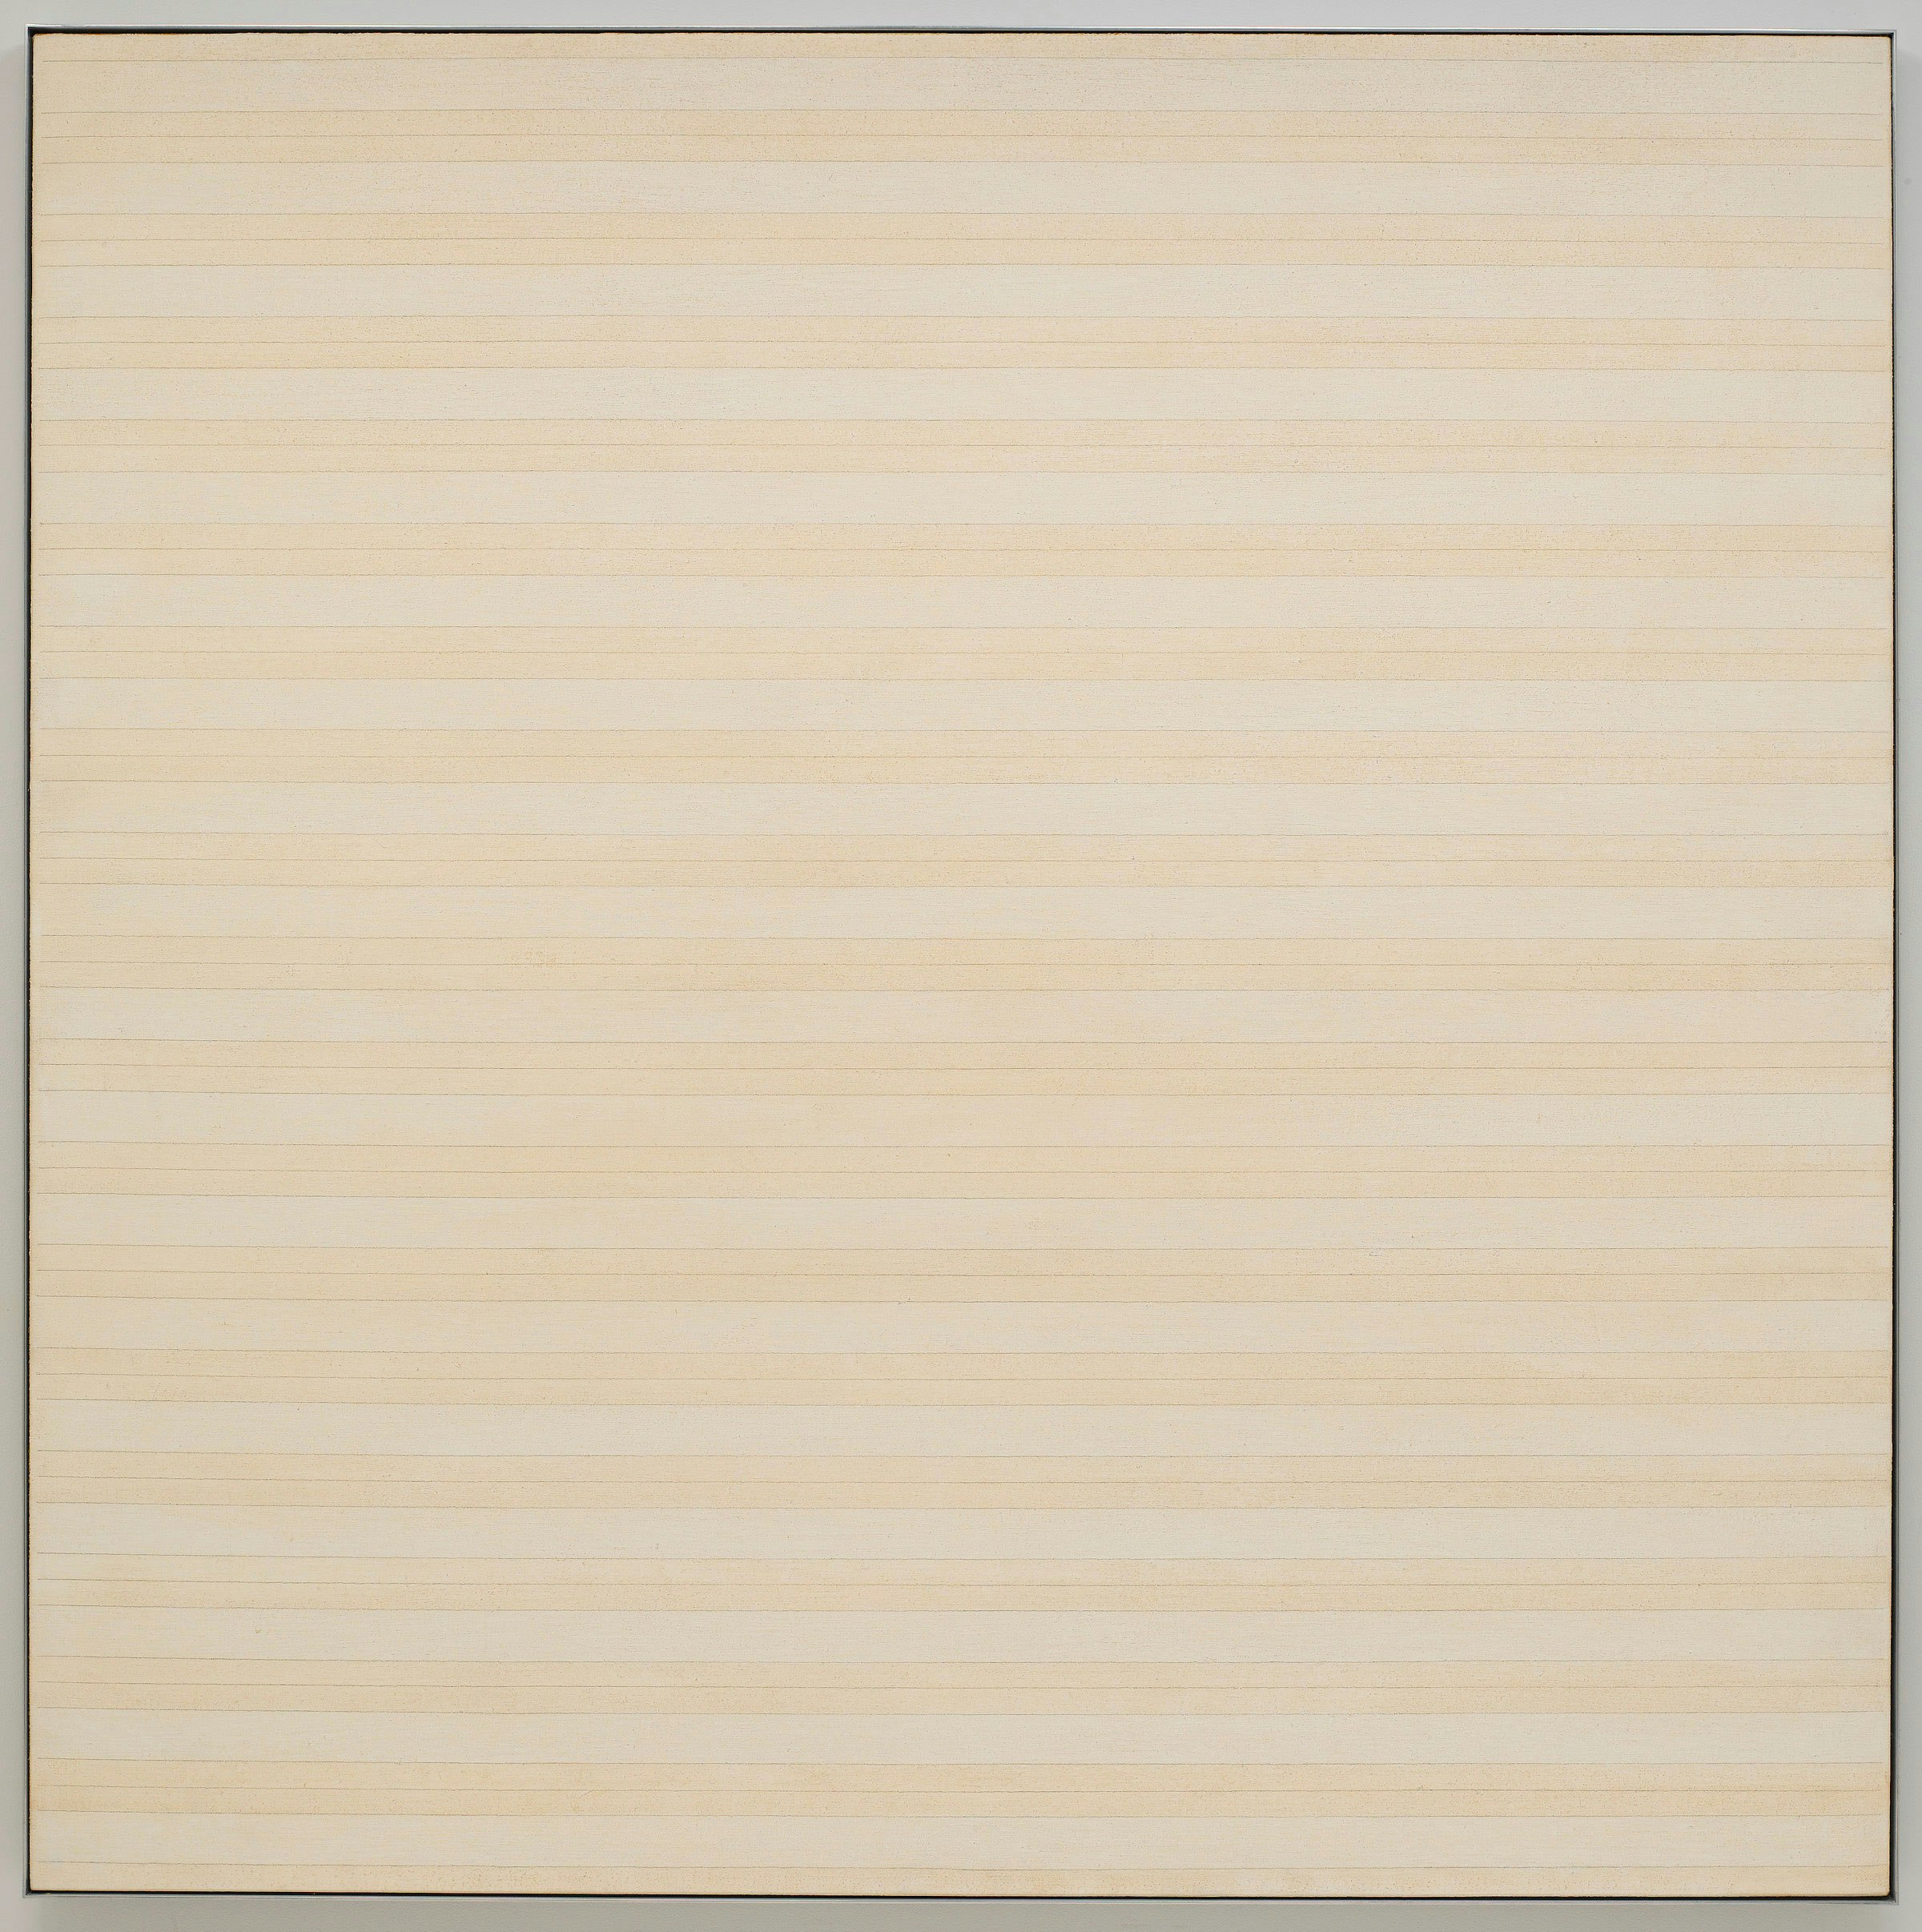 Agnes Martin, <em>Desert Flower</em>, 1985. Acrylic and pencil on linen, 72 1/8 x 72 1/8 inches. © Estate of Agnes Martin /Artists Rights Society (ARS), New York.